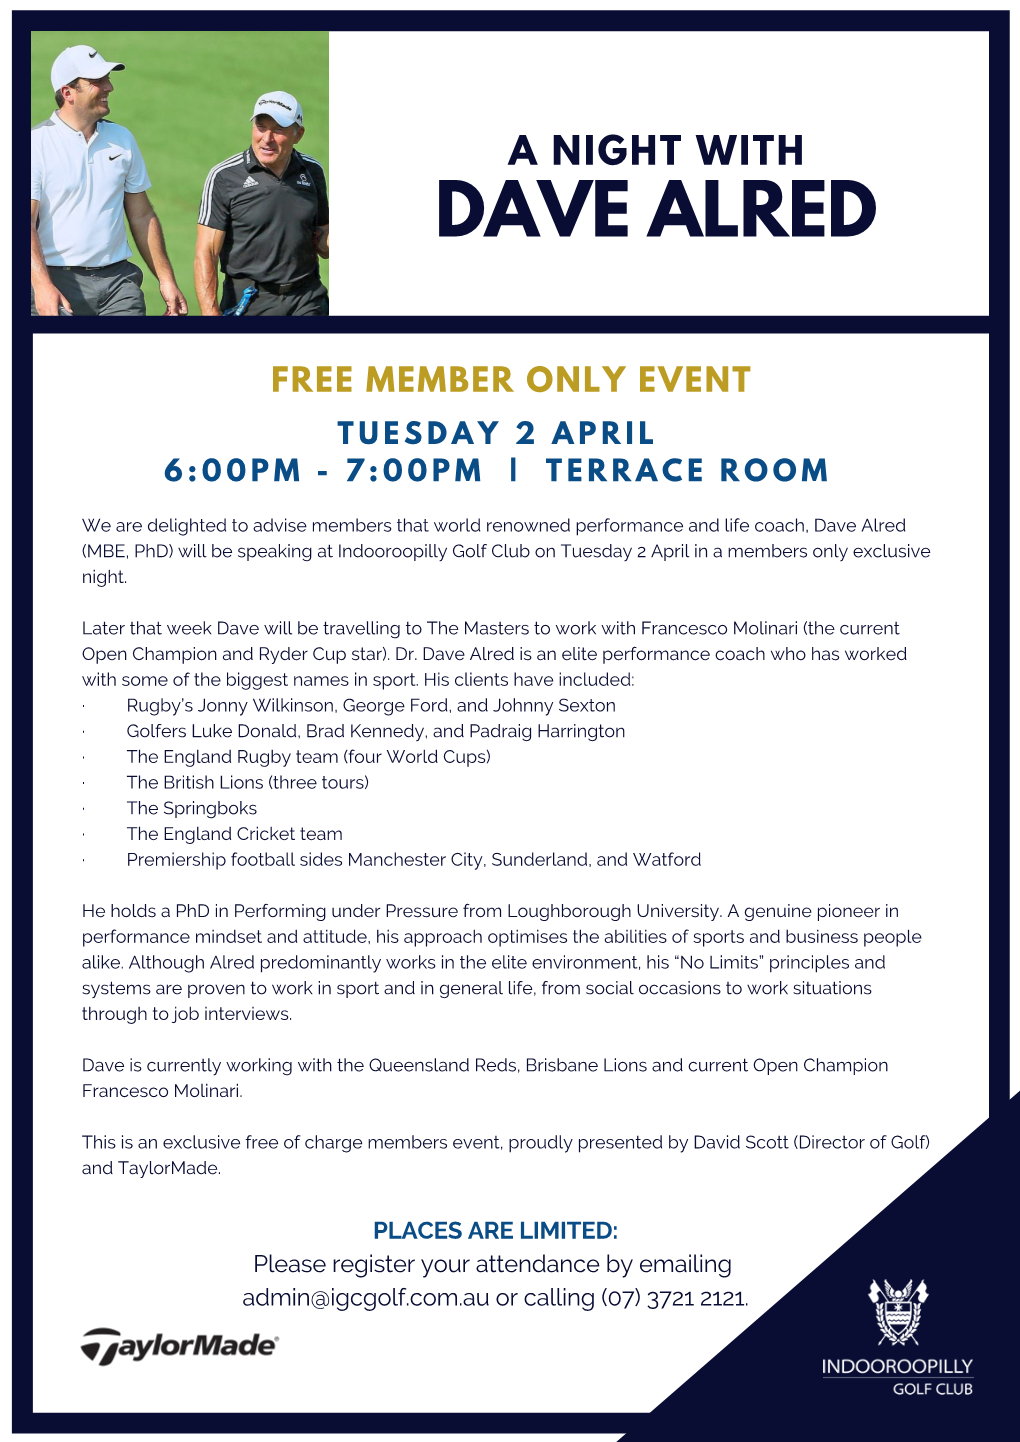 A Night with Dave Alred